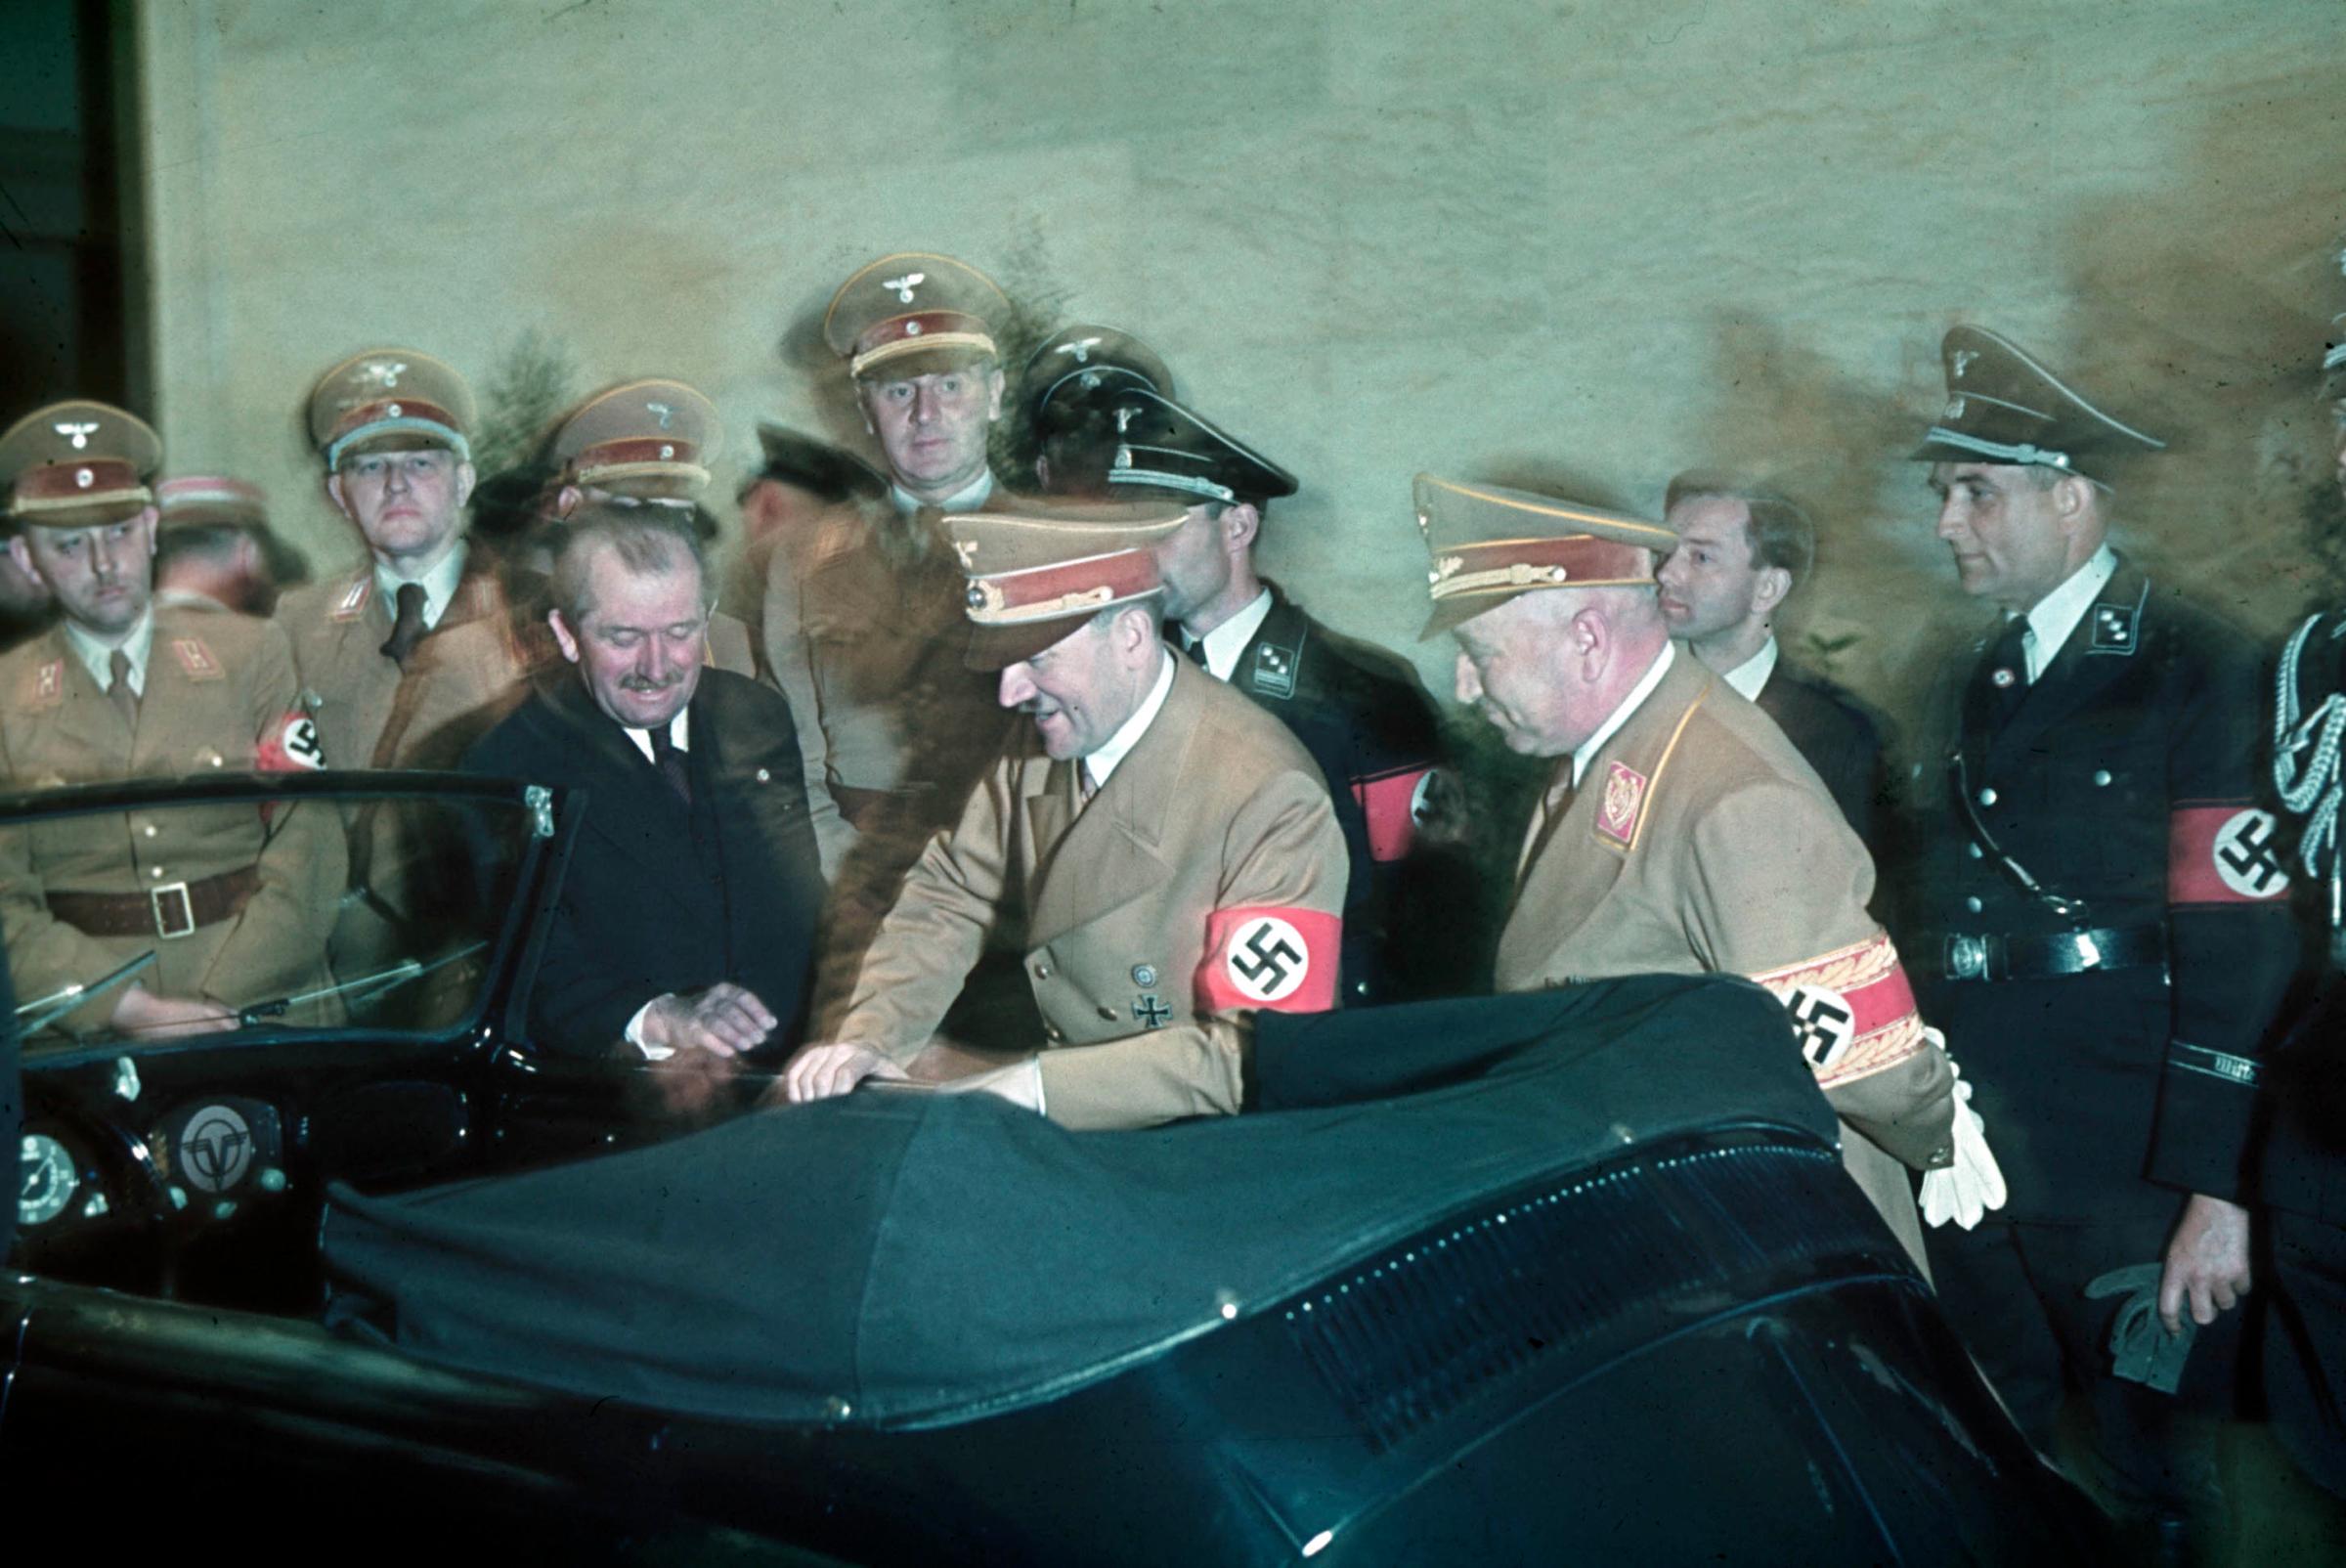 Ferdinand Porsche (left, in dark suit) presents a newly designed convertible VW to Adolf Hitler in celebration of the Fuhrer's 50th Birthday, Berlin, Germany, 1939.